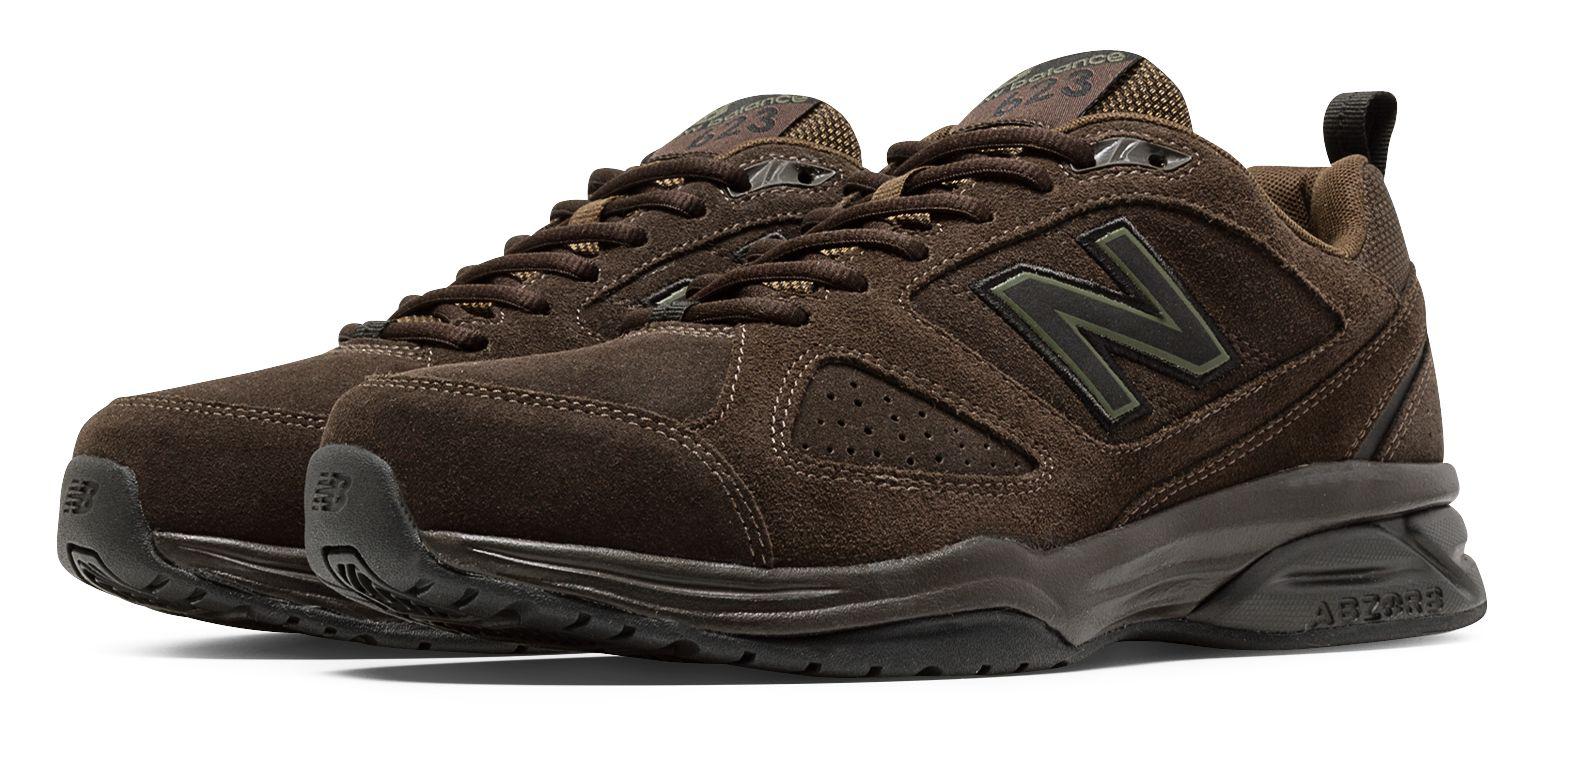 New Balance 623v3 Suede Trainer in Brown for Men - Lyst